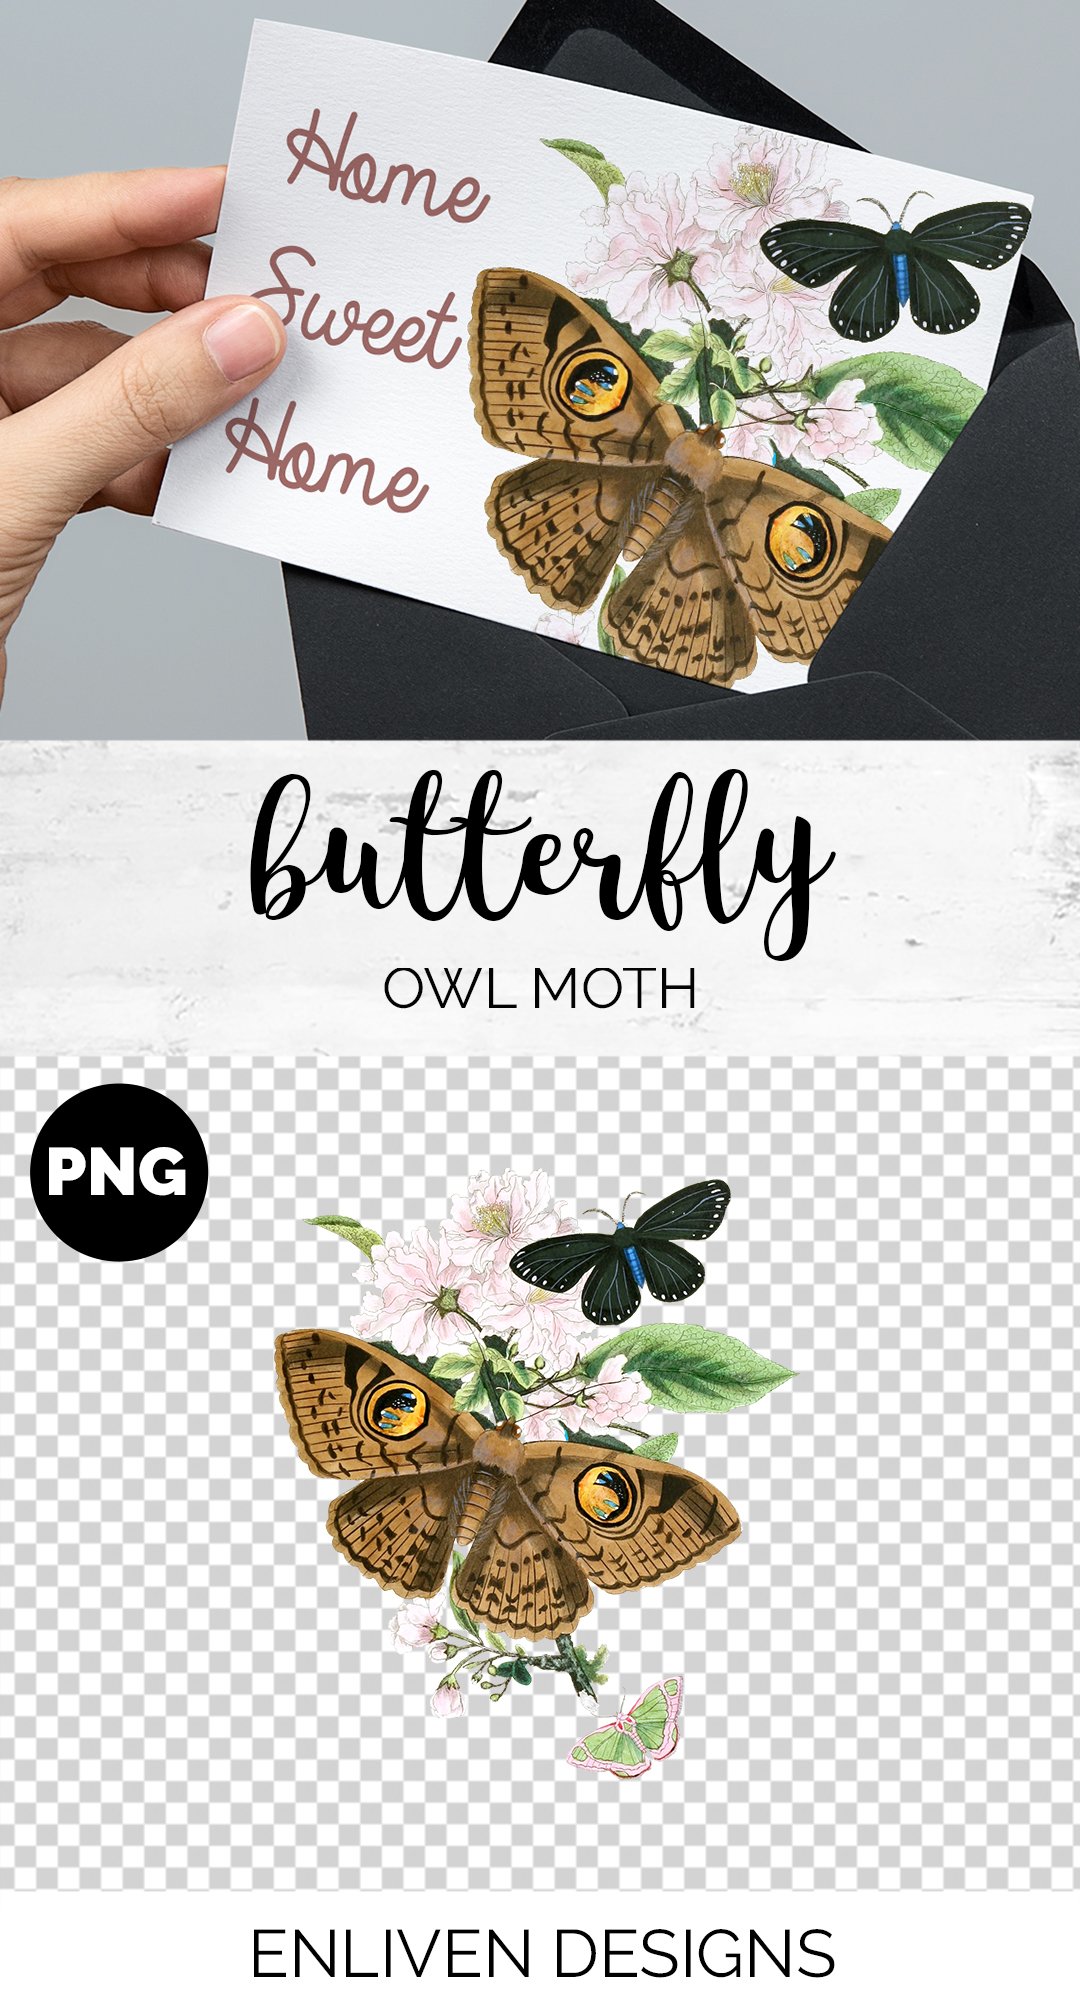 Owl Moth Butterfly Vintage Insect preview image.